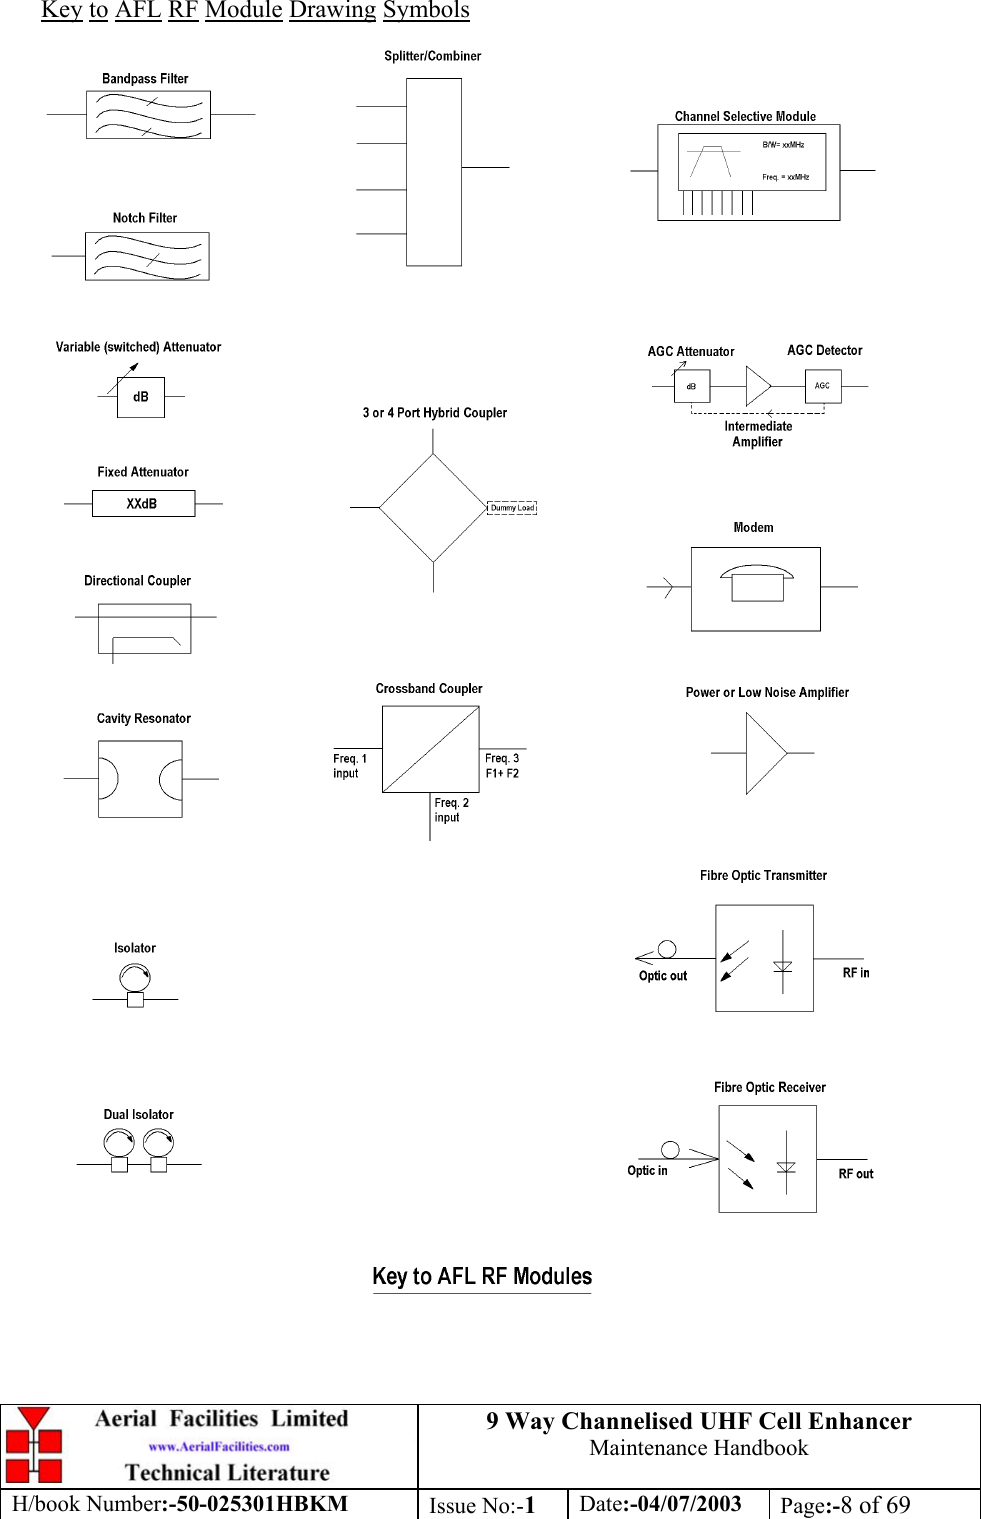 9 Way Channelised UHF Cell EnhancerMaintenance HandbookH/book Number:-50-025301HBKM Issue No:-1Date:-04/07/2003 Page:-8 of 69Key to AFL RF Module Drawing Symbols